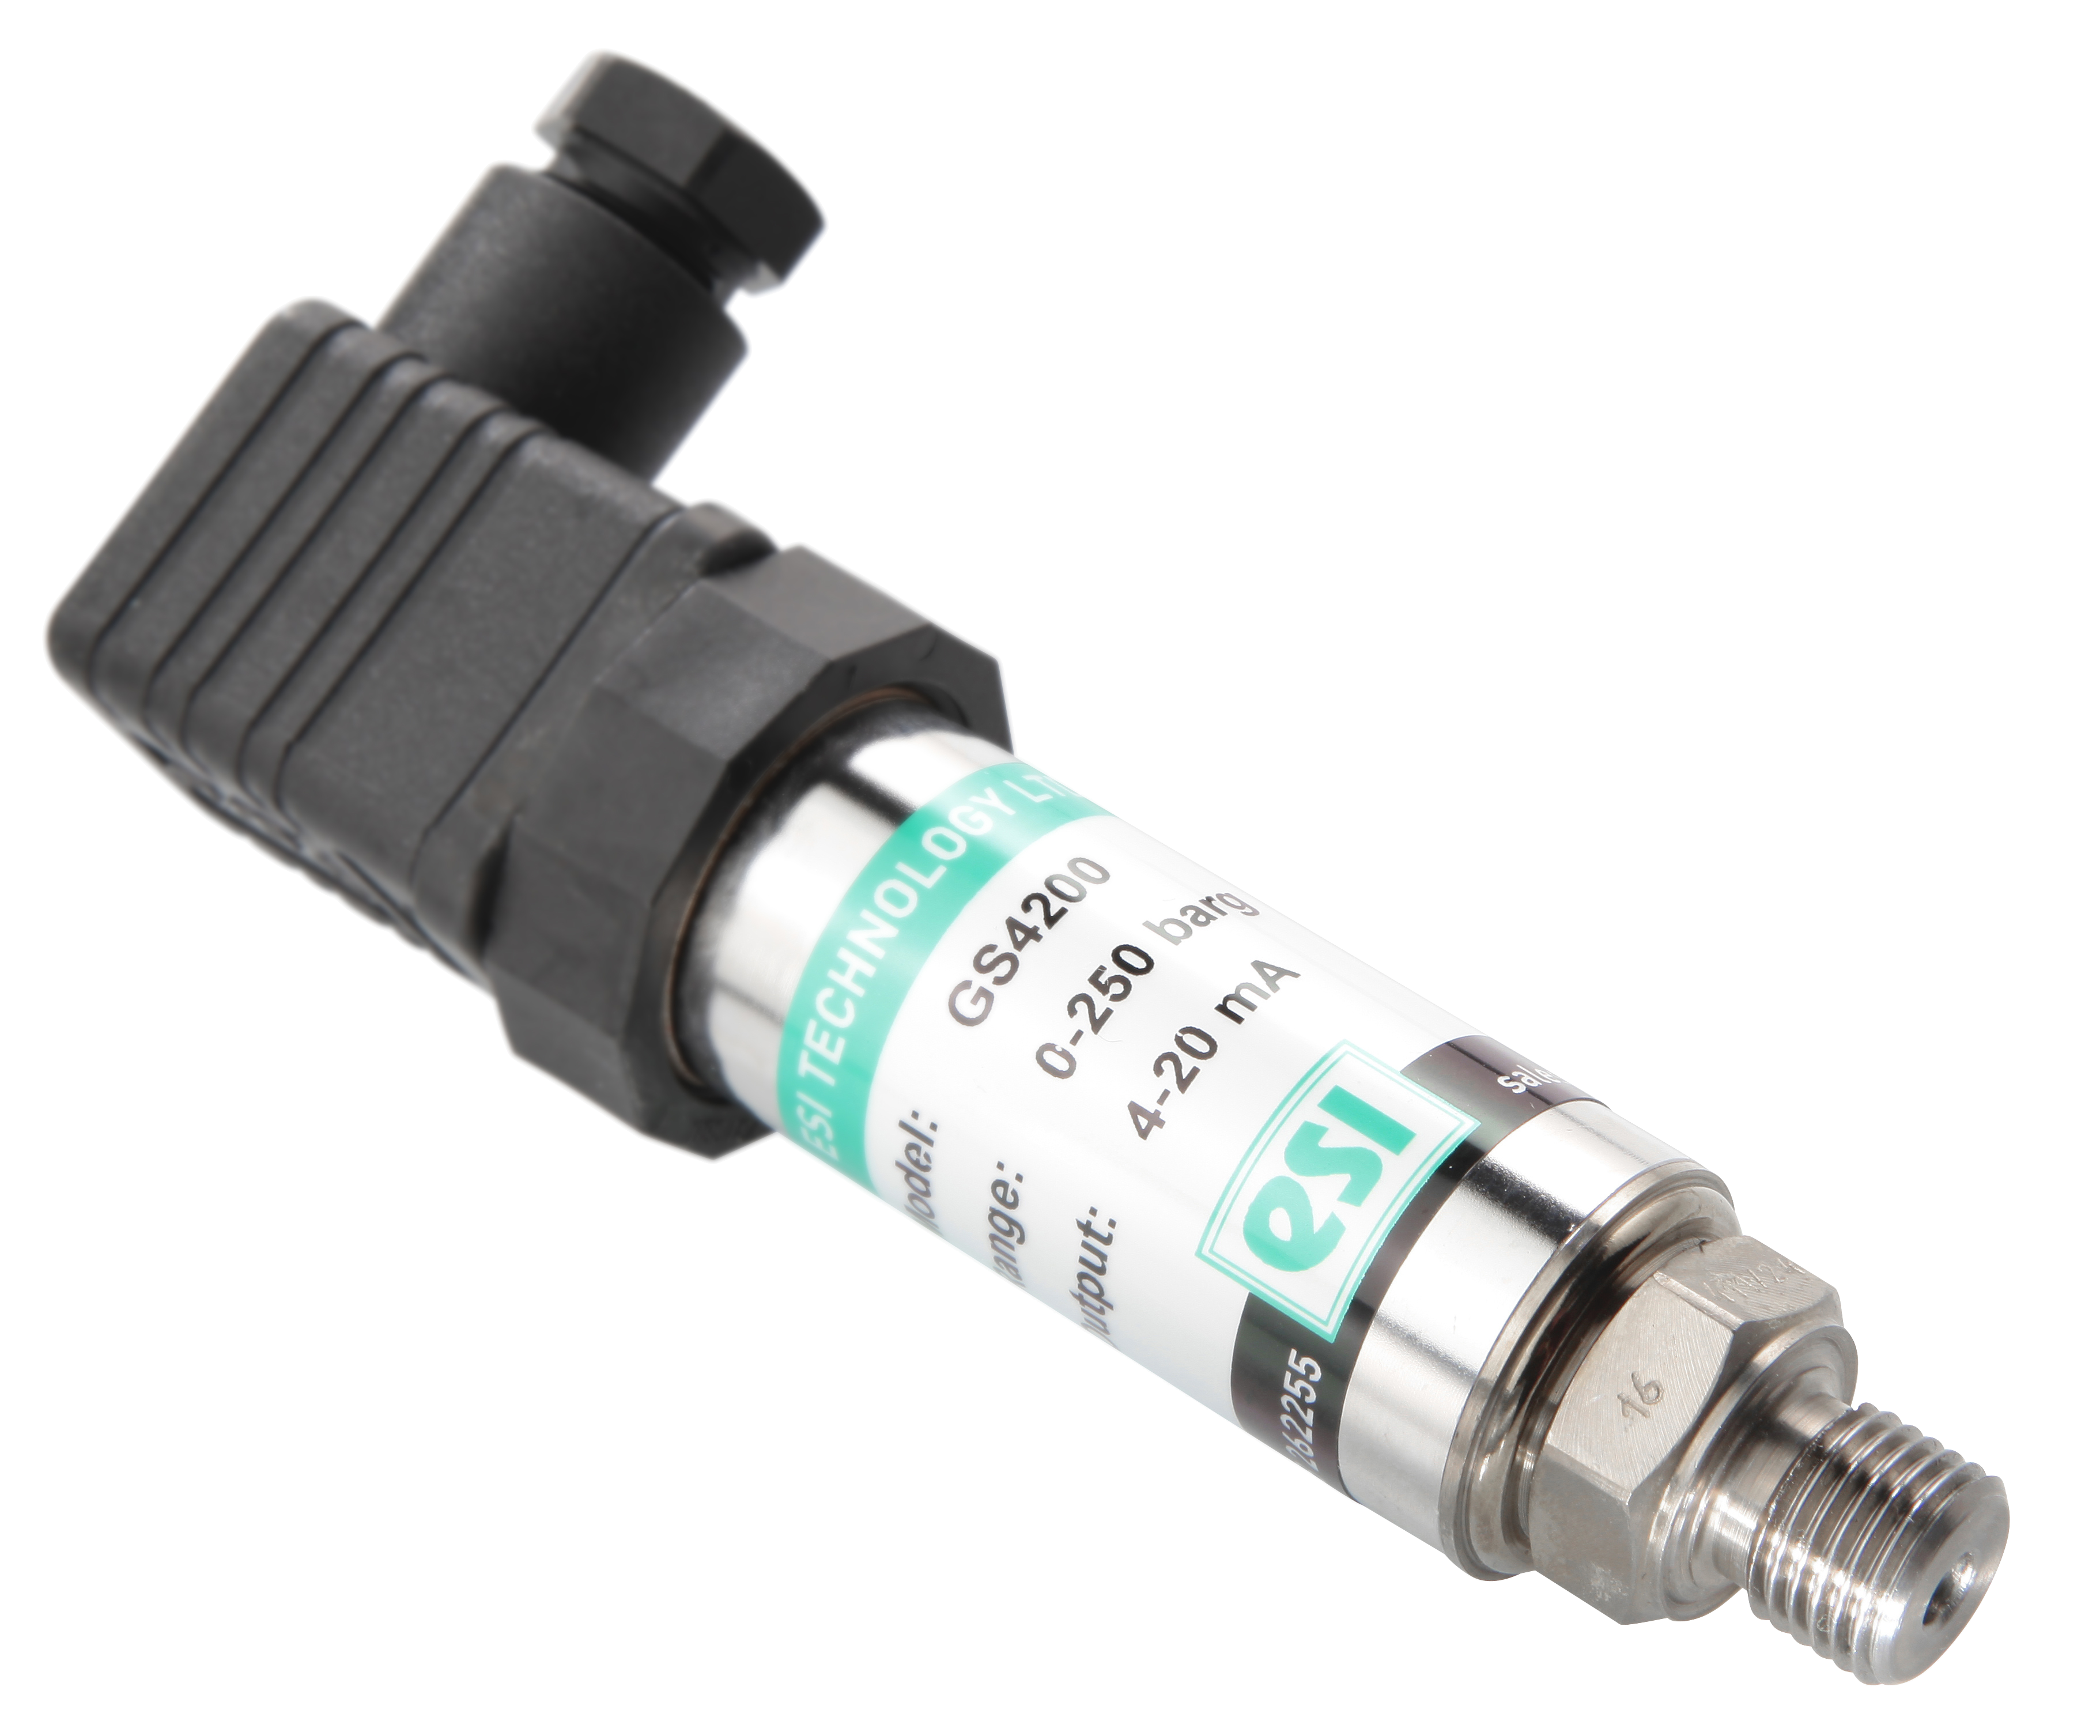 The ESI GS4200 Pressure Transducer. A small device to measure pressure of tanks. 